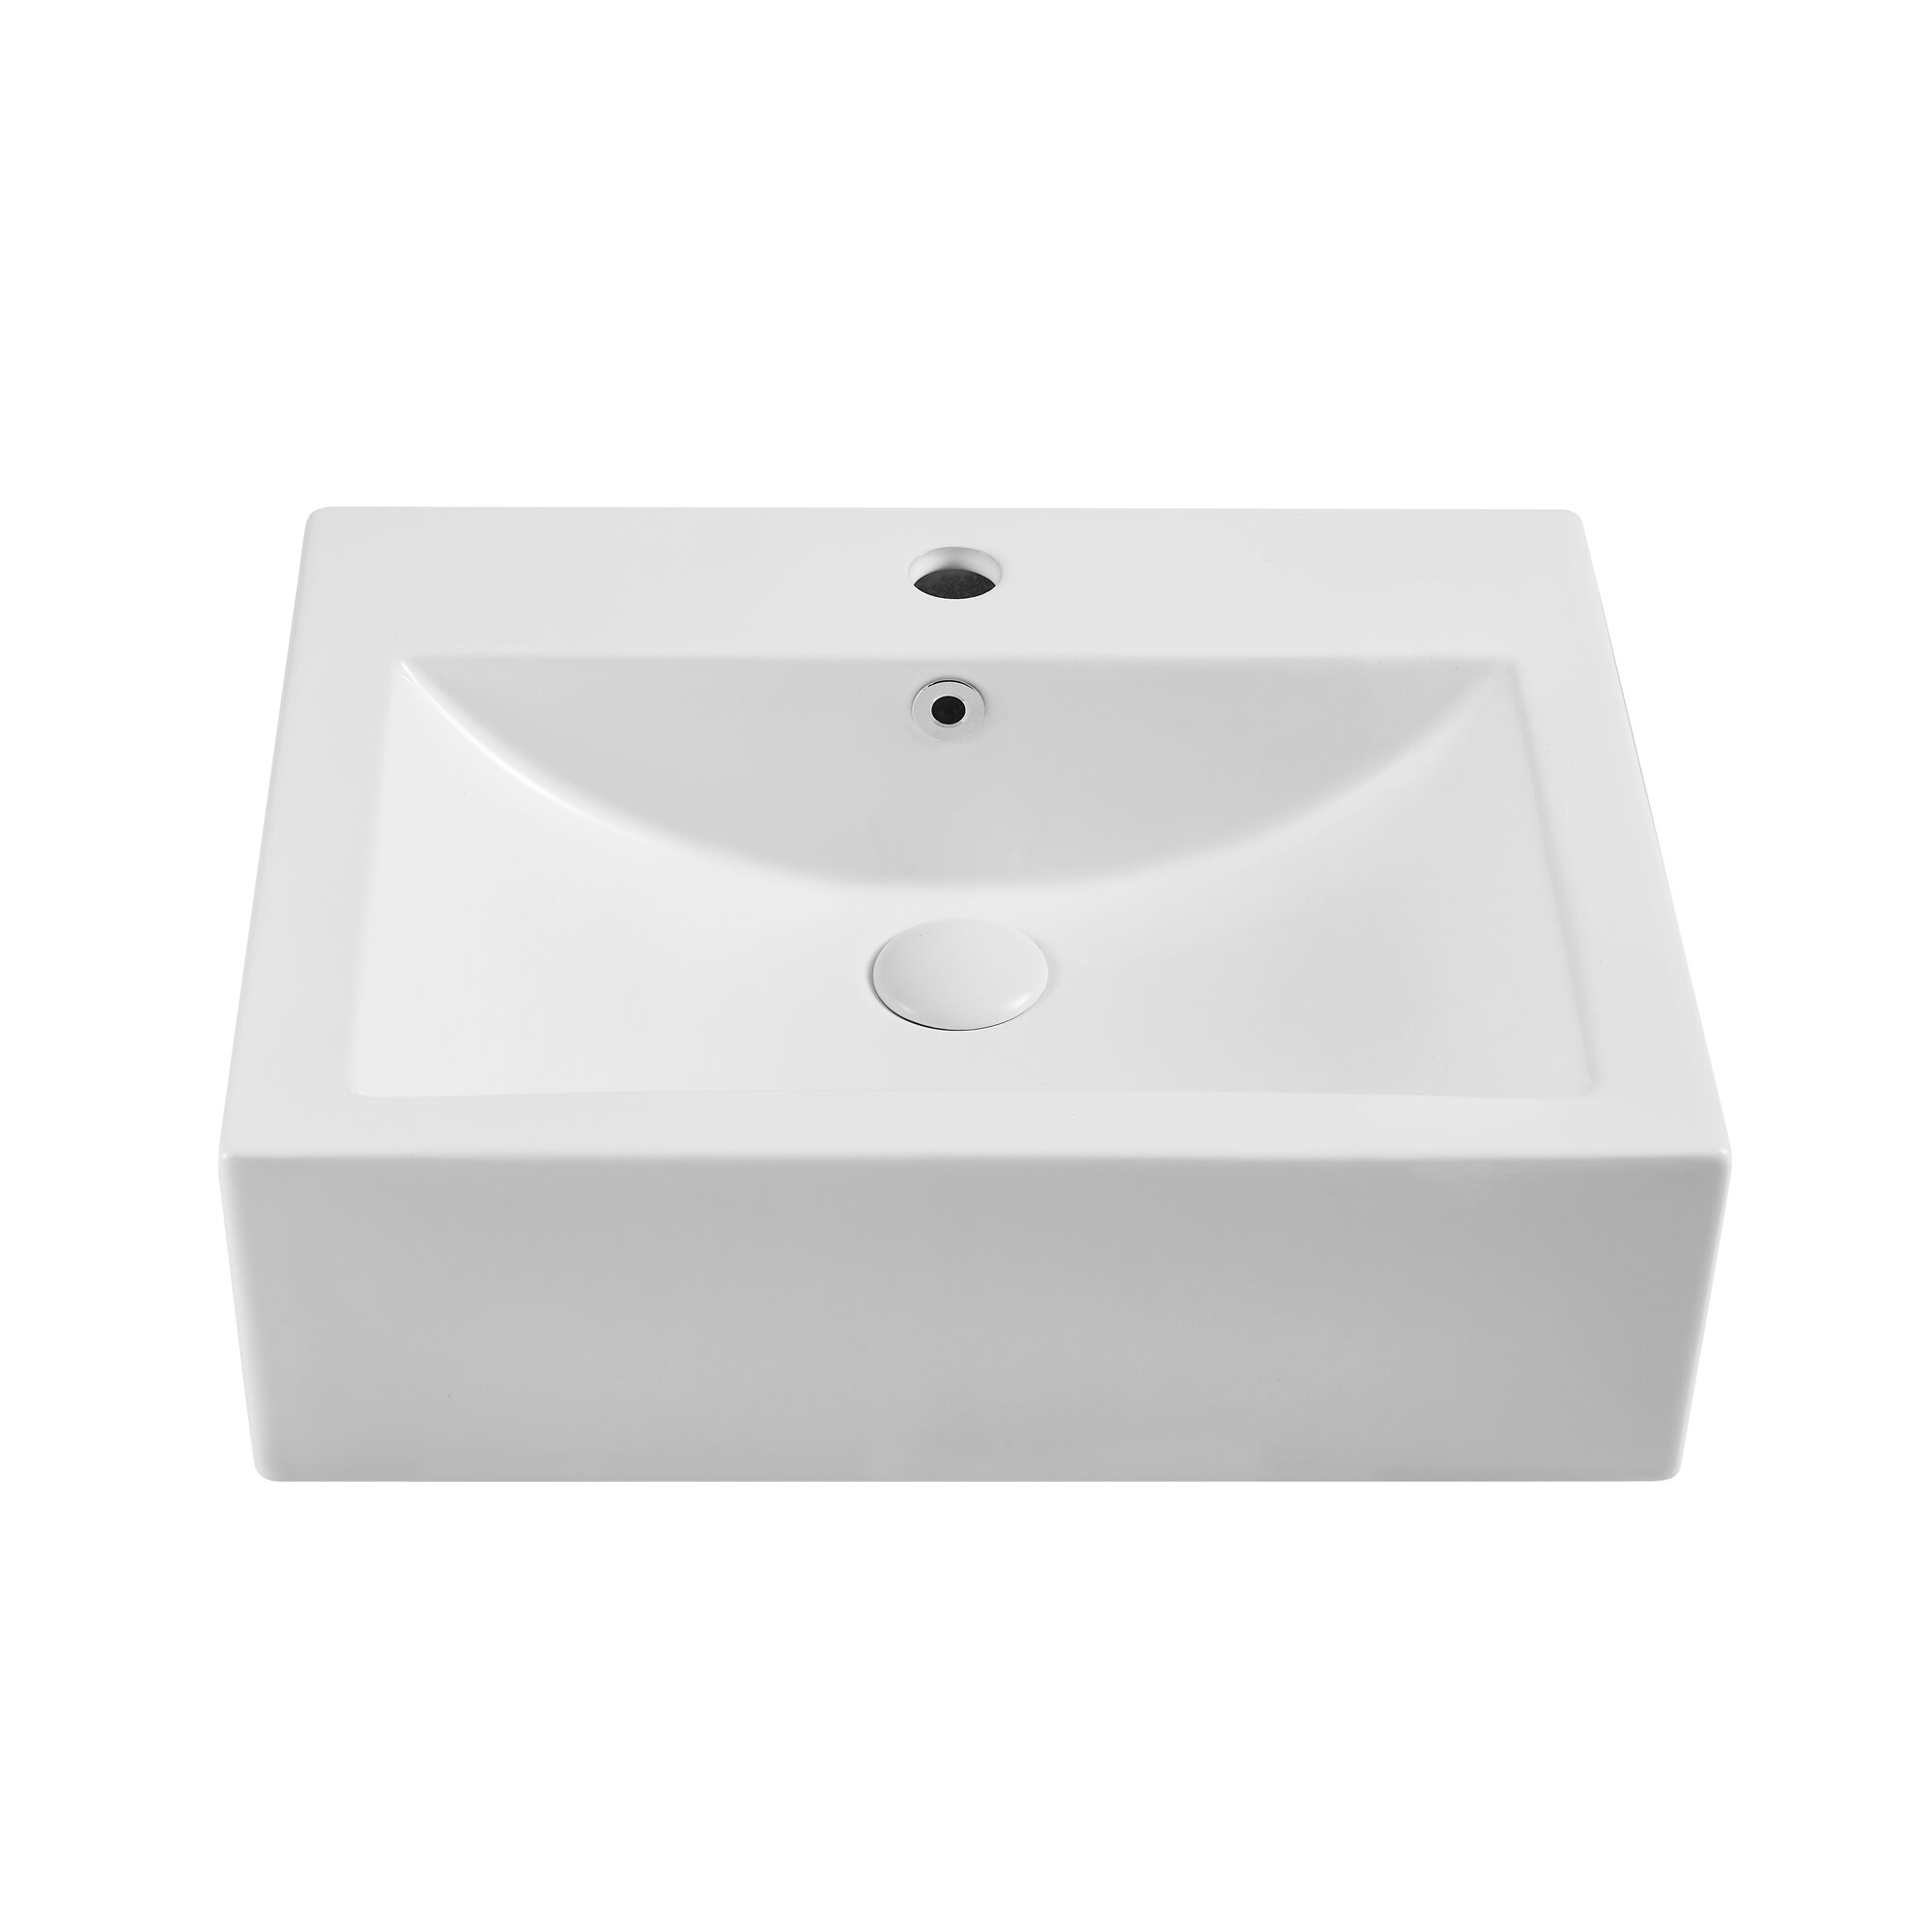 Caodoc White Ceramic Square Wall Mount Bathroom Sink With Overflow Wayfair